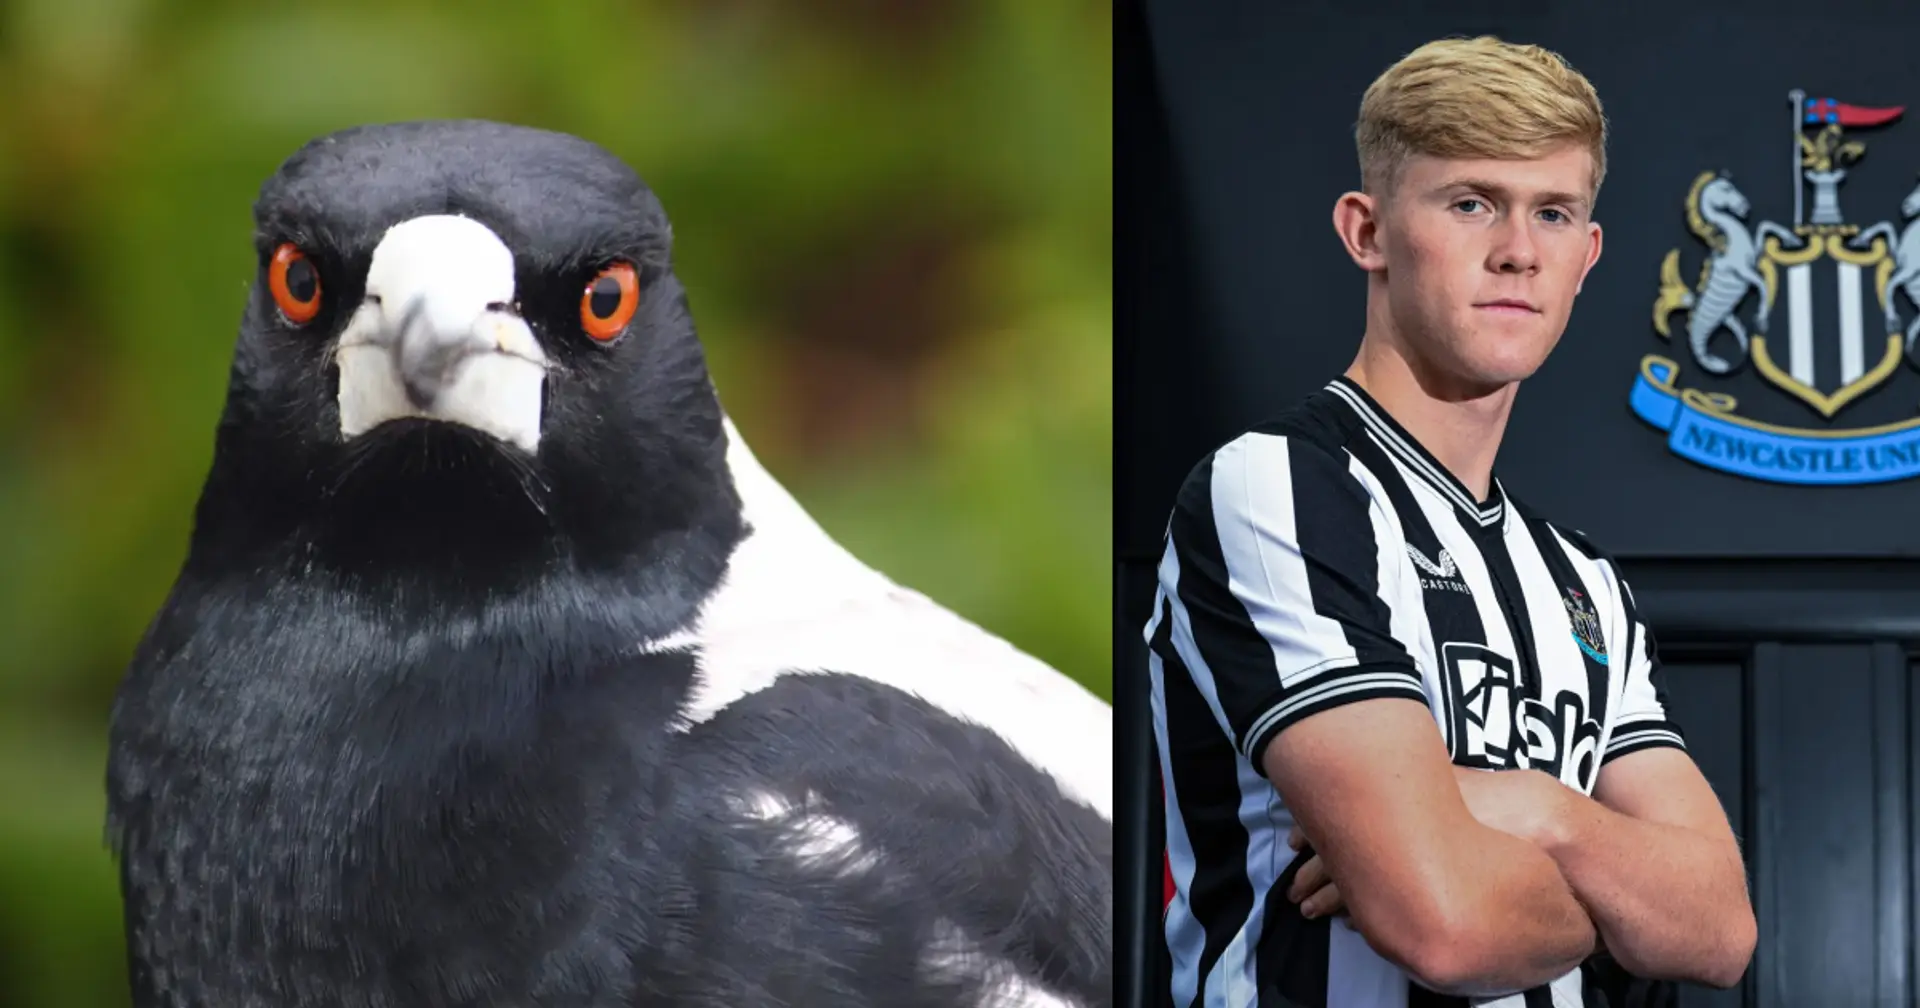 'Death comes for us all': Newcastle fans react to latest £35m signing from Chelsea